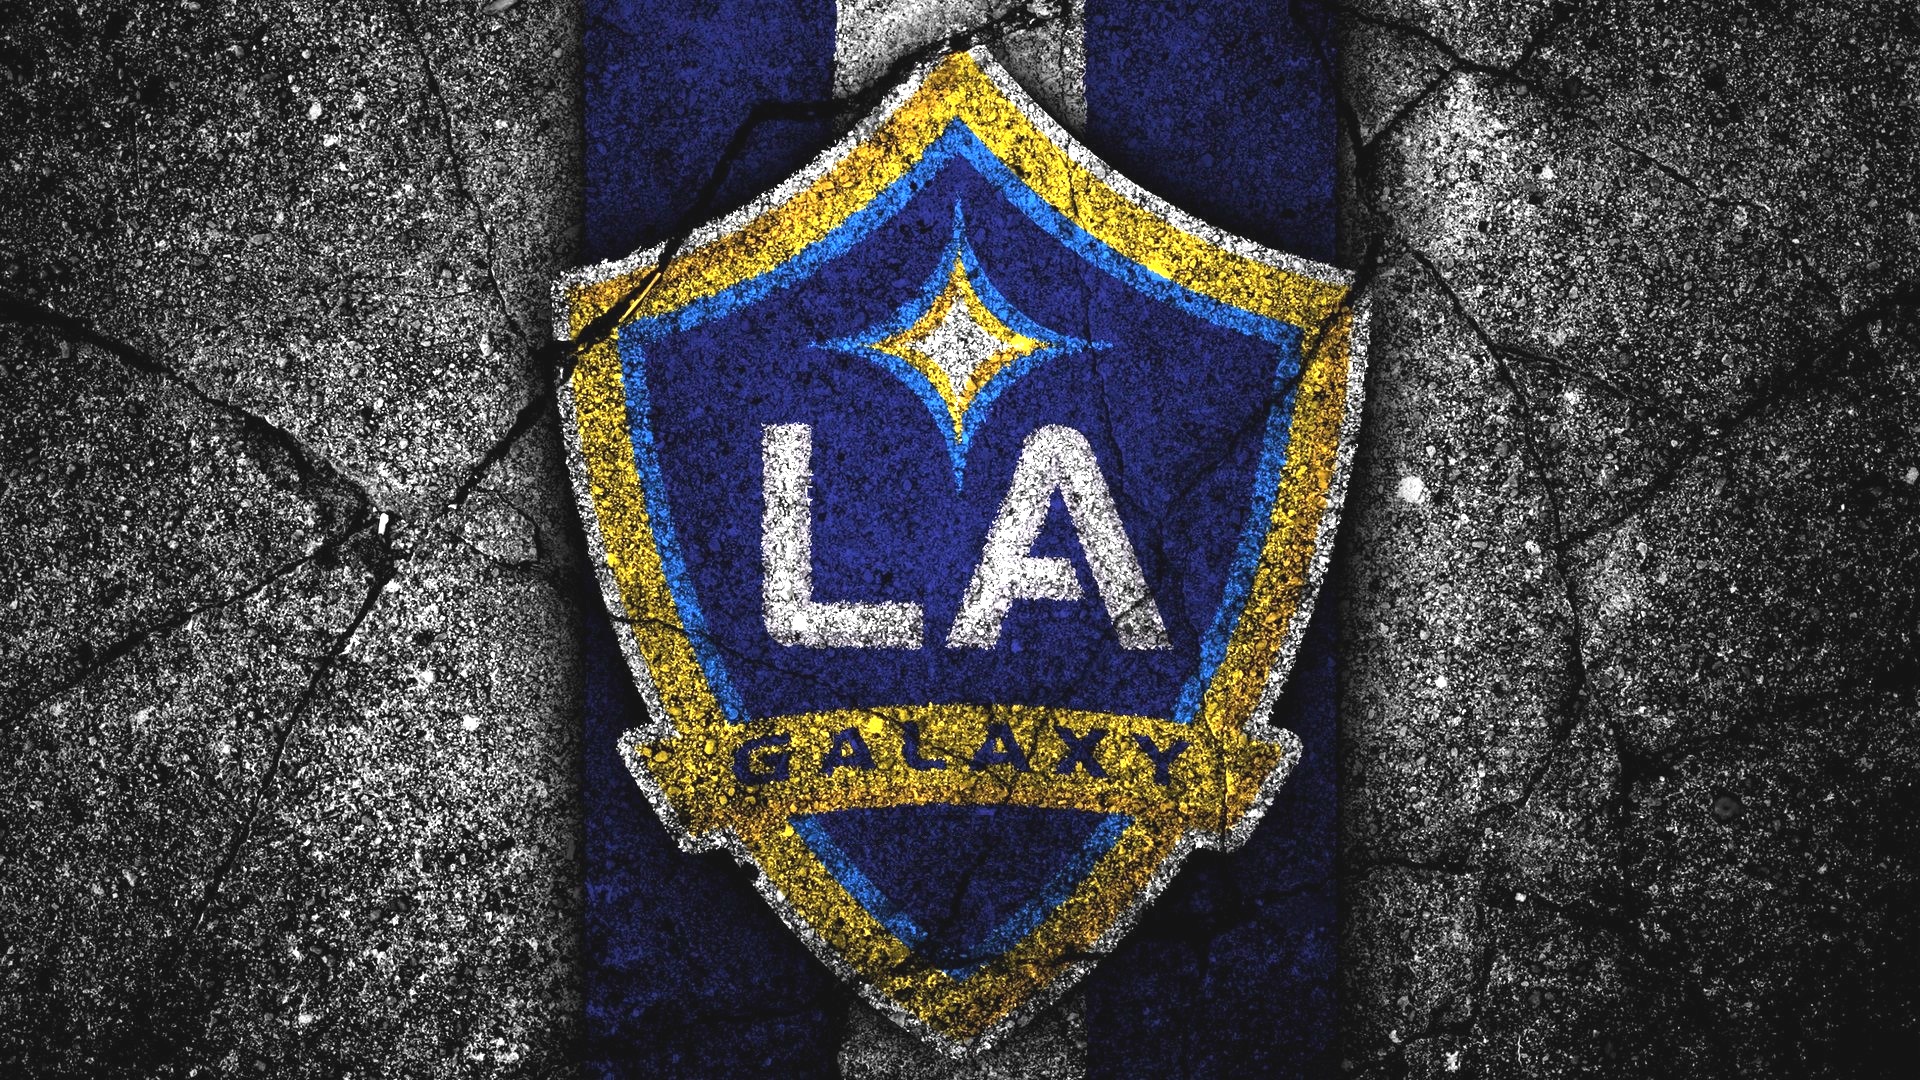 LA Galaxy Wallpaper HD with high-resolution 1920x1080 pixel. You can use this wallpaper for your Desktop Computers, Mac Screensavers, Windows Backgrounds, iPhone Wallpapers, Tablet or Android Lock screen and another Mobile device